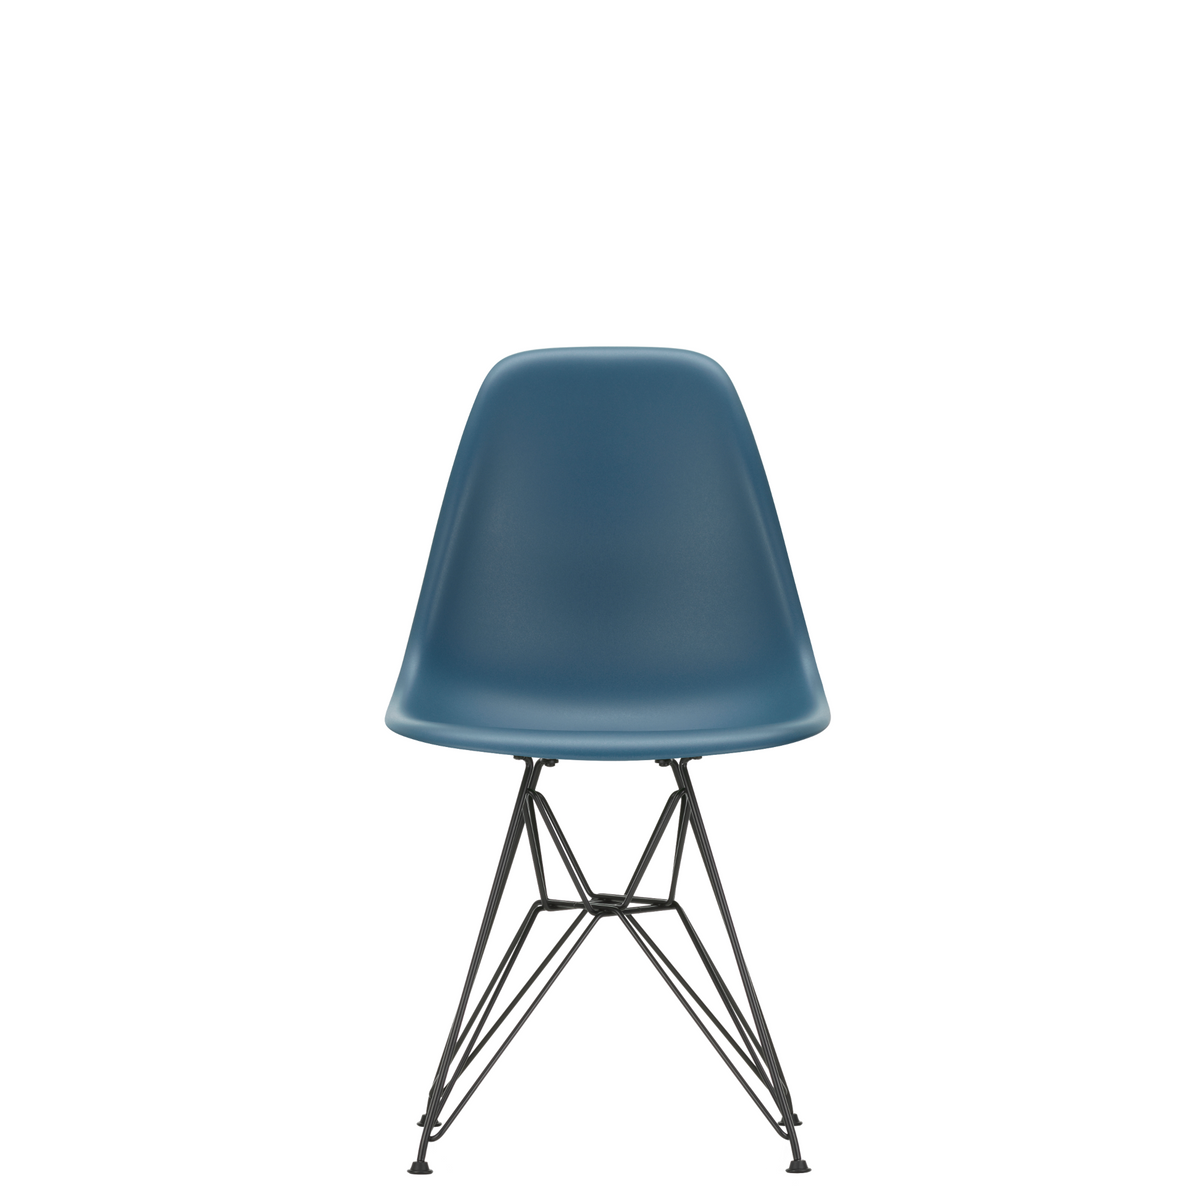 Vitra Eames Plastic Side Chair DSR Powder Coated for Outdoor Use Sea Blue Shell Black Powdercoated Base